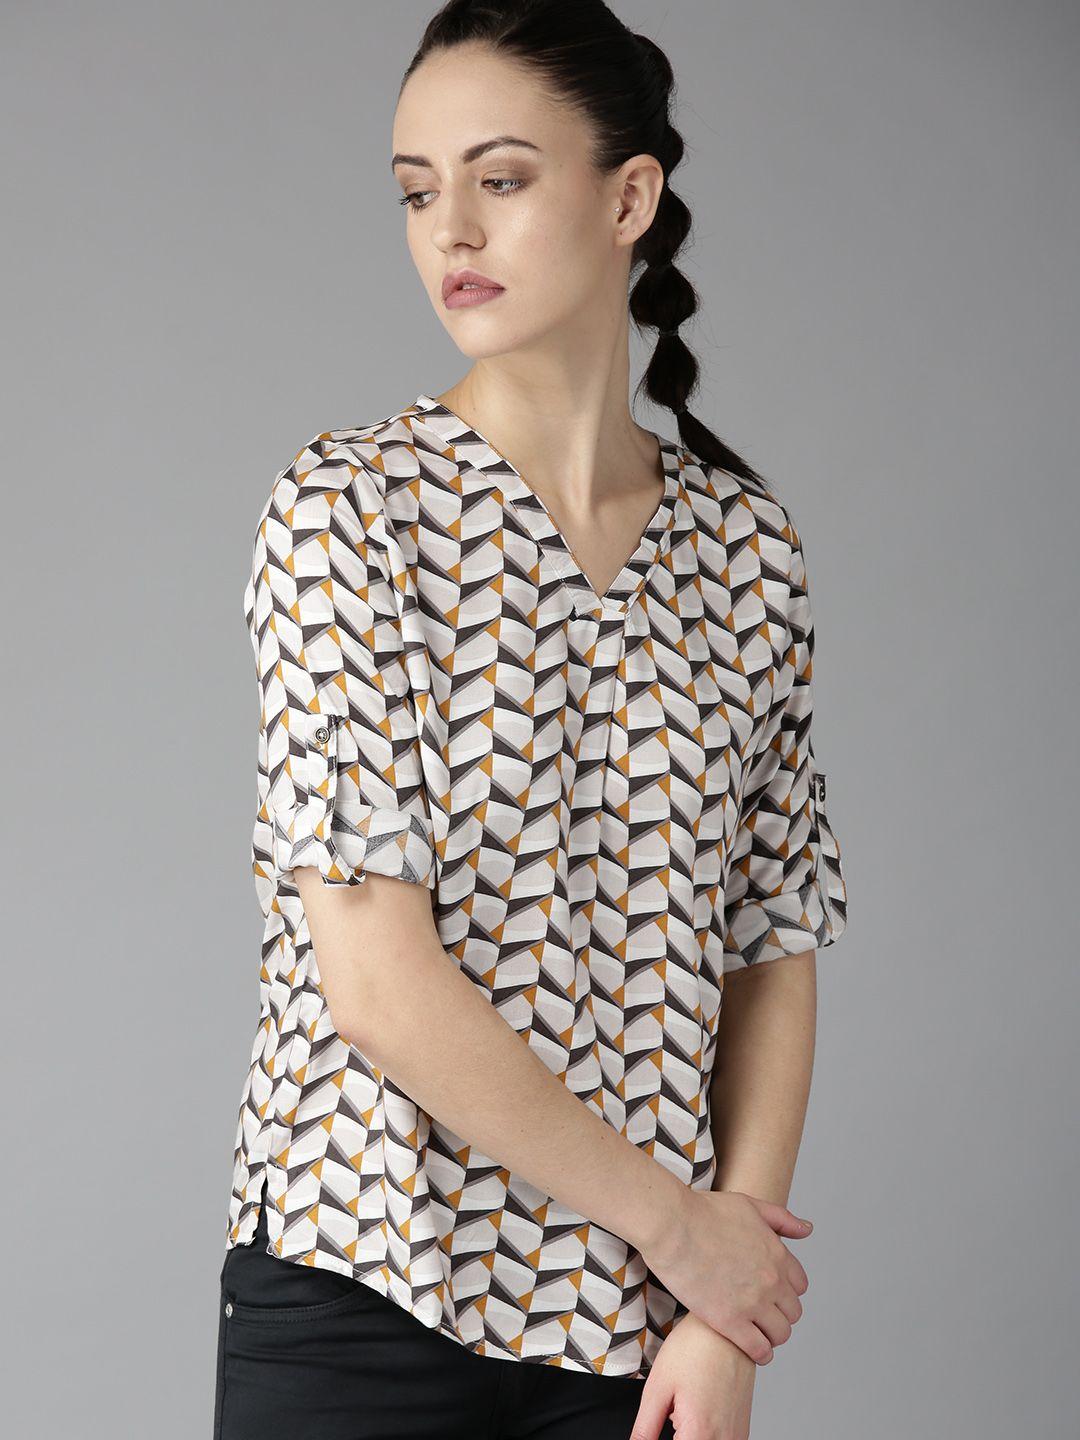 the roadster lifestyle co women white & mustard yellow printed top